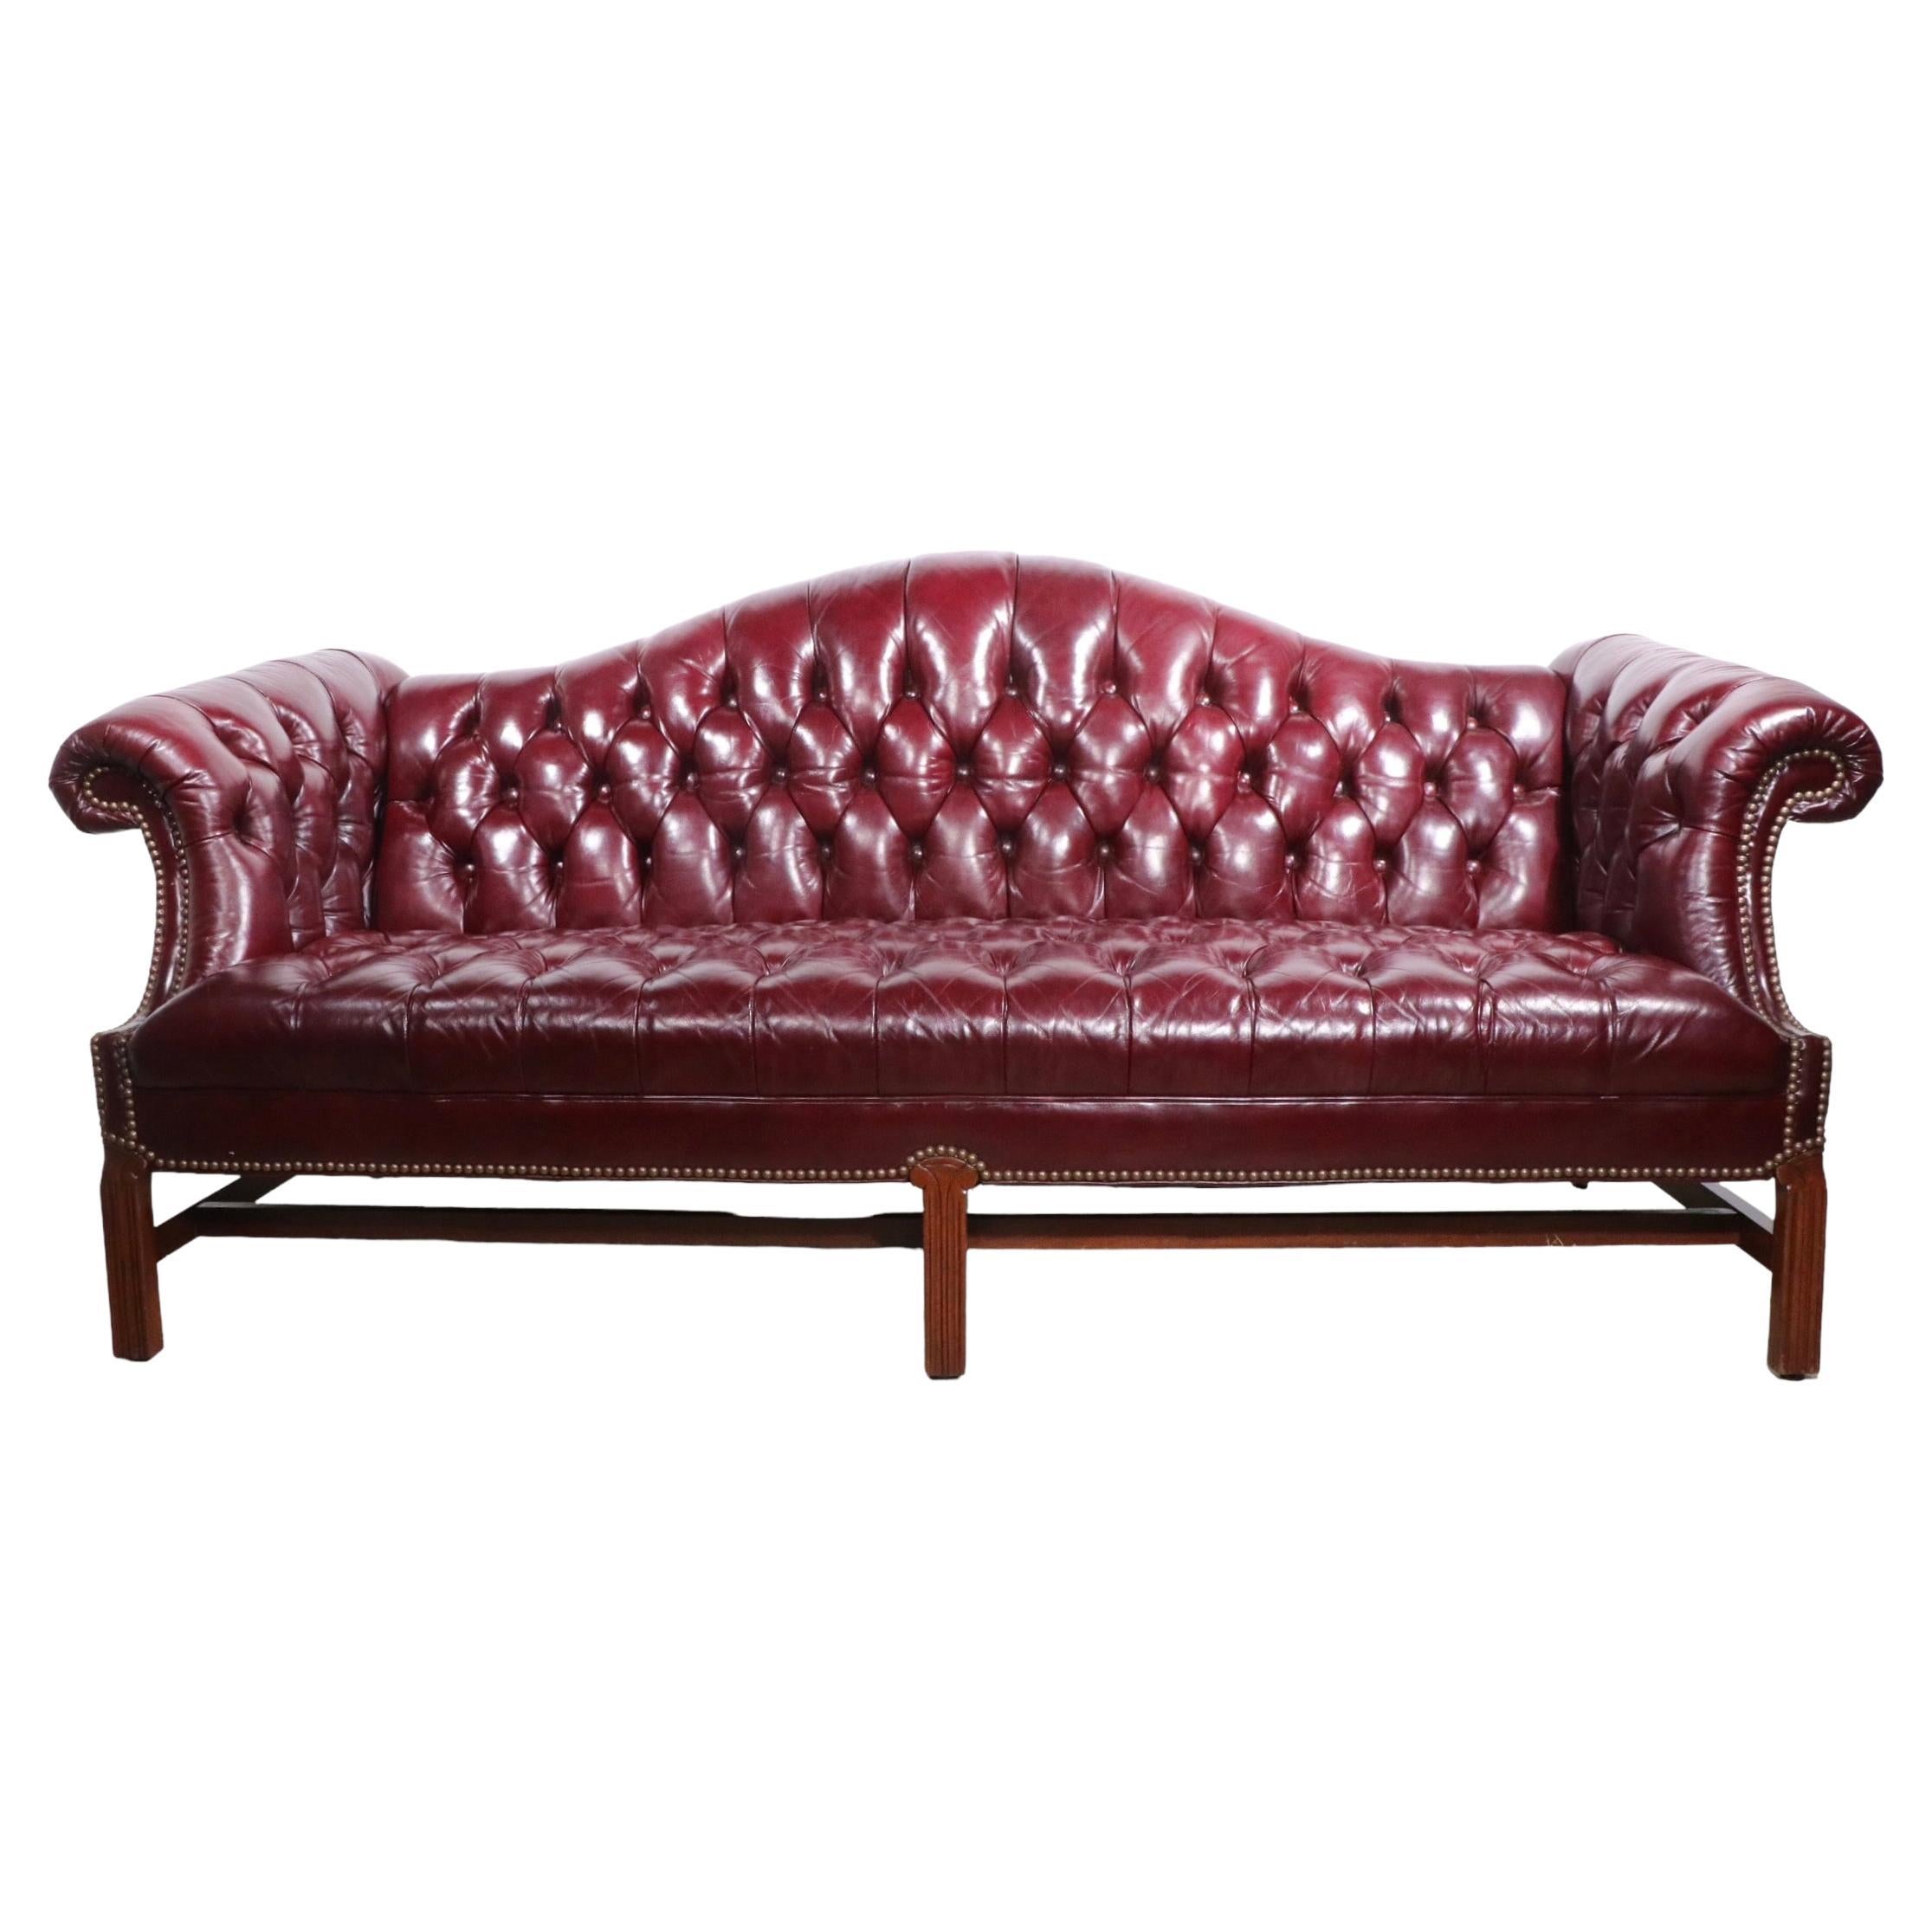  Tufted Burgundy  Leather Chesterfield Sofa c 1950/1960's